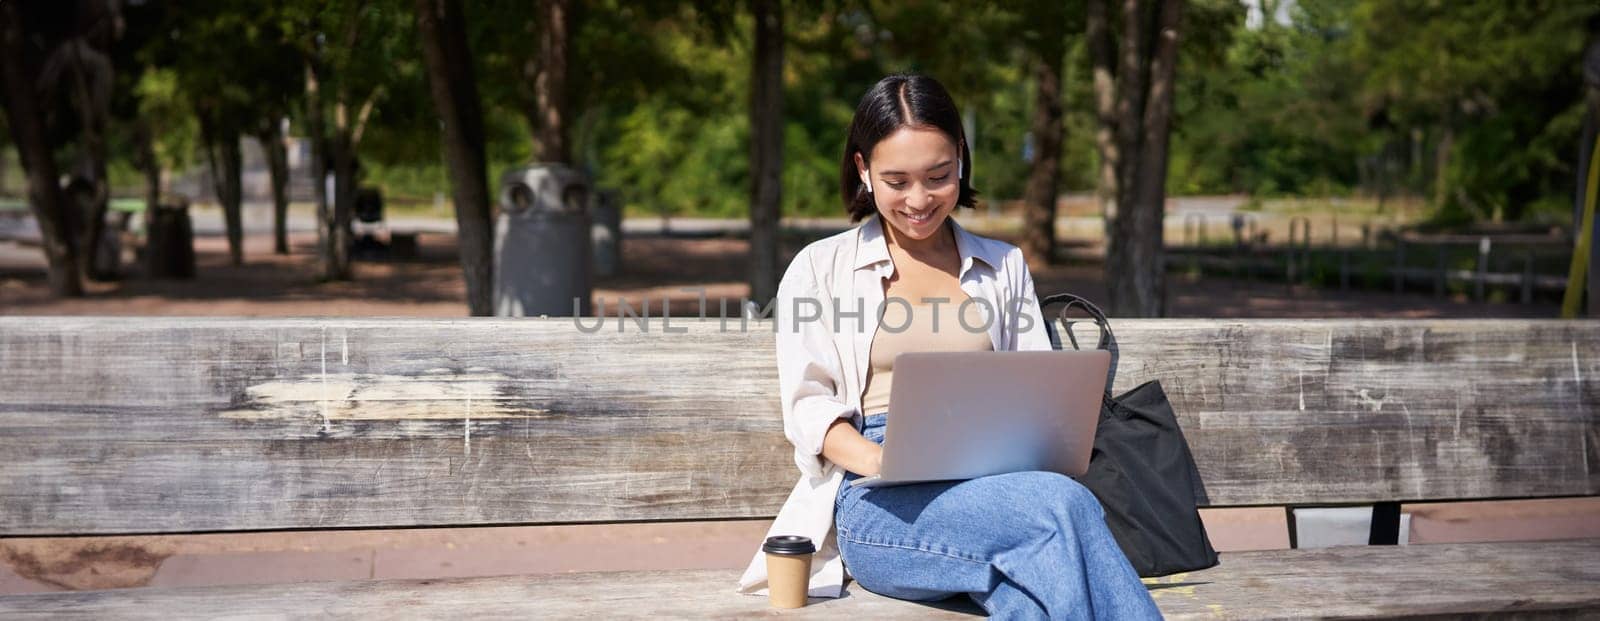 Portrait of korean woman sitting with laptop in park on bench, working outdoors, student doing homework, drinking takeaway coffee.